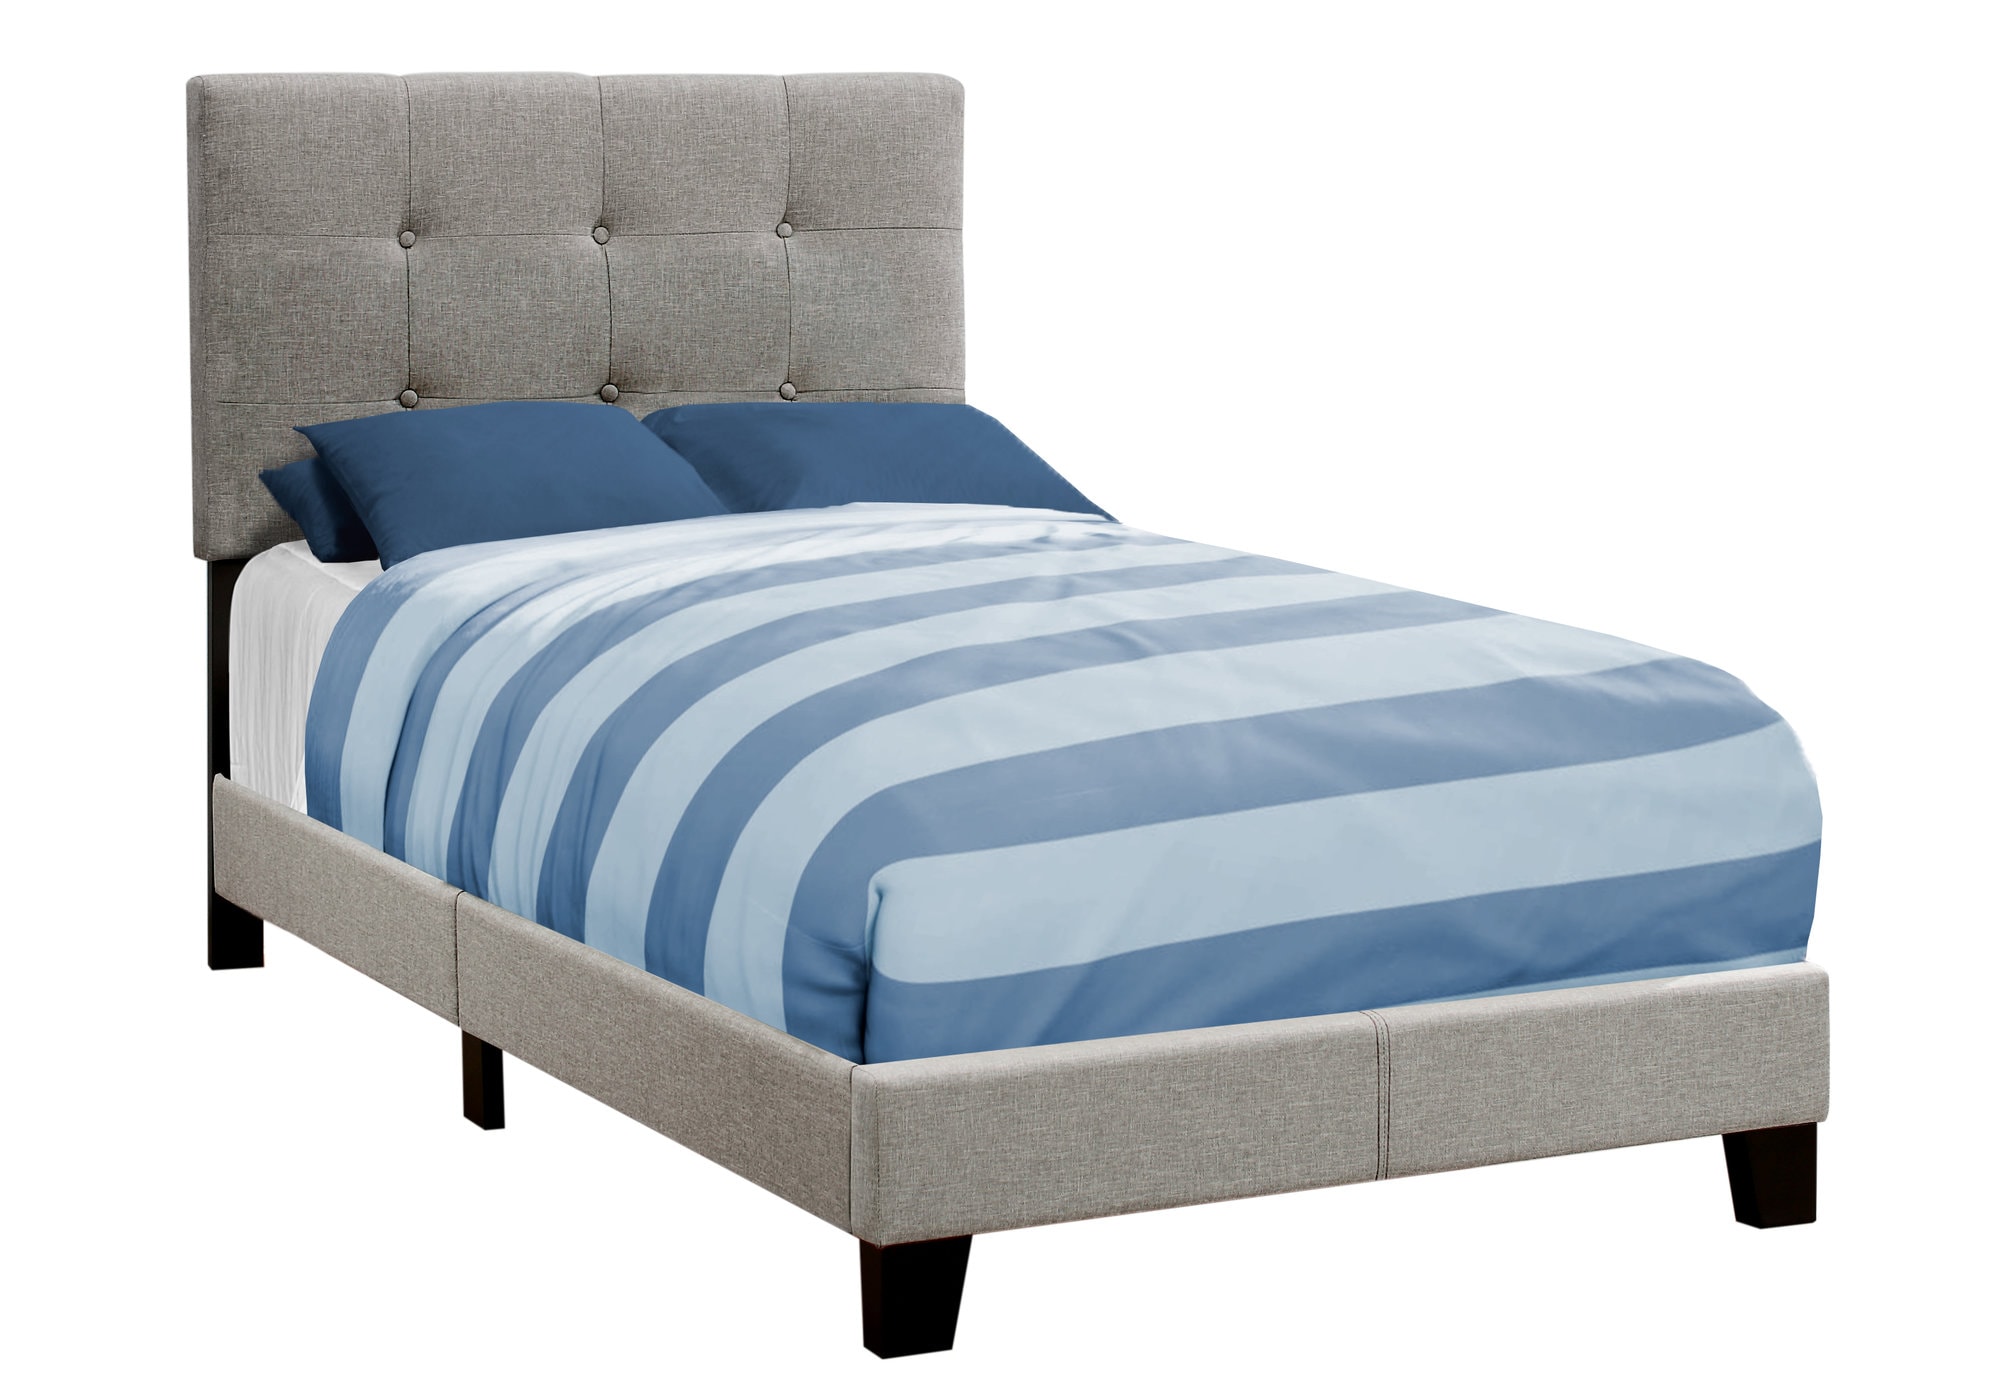 Monarch Specialties Bed Twin Size, Twin Size Bed Images